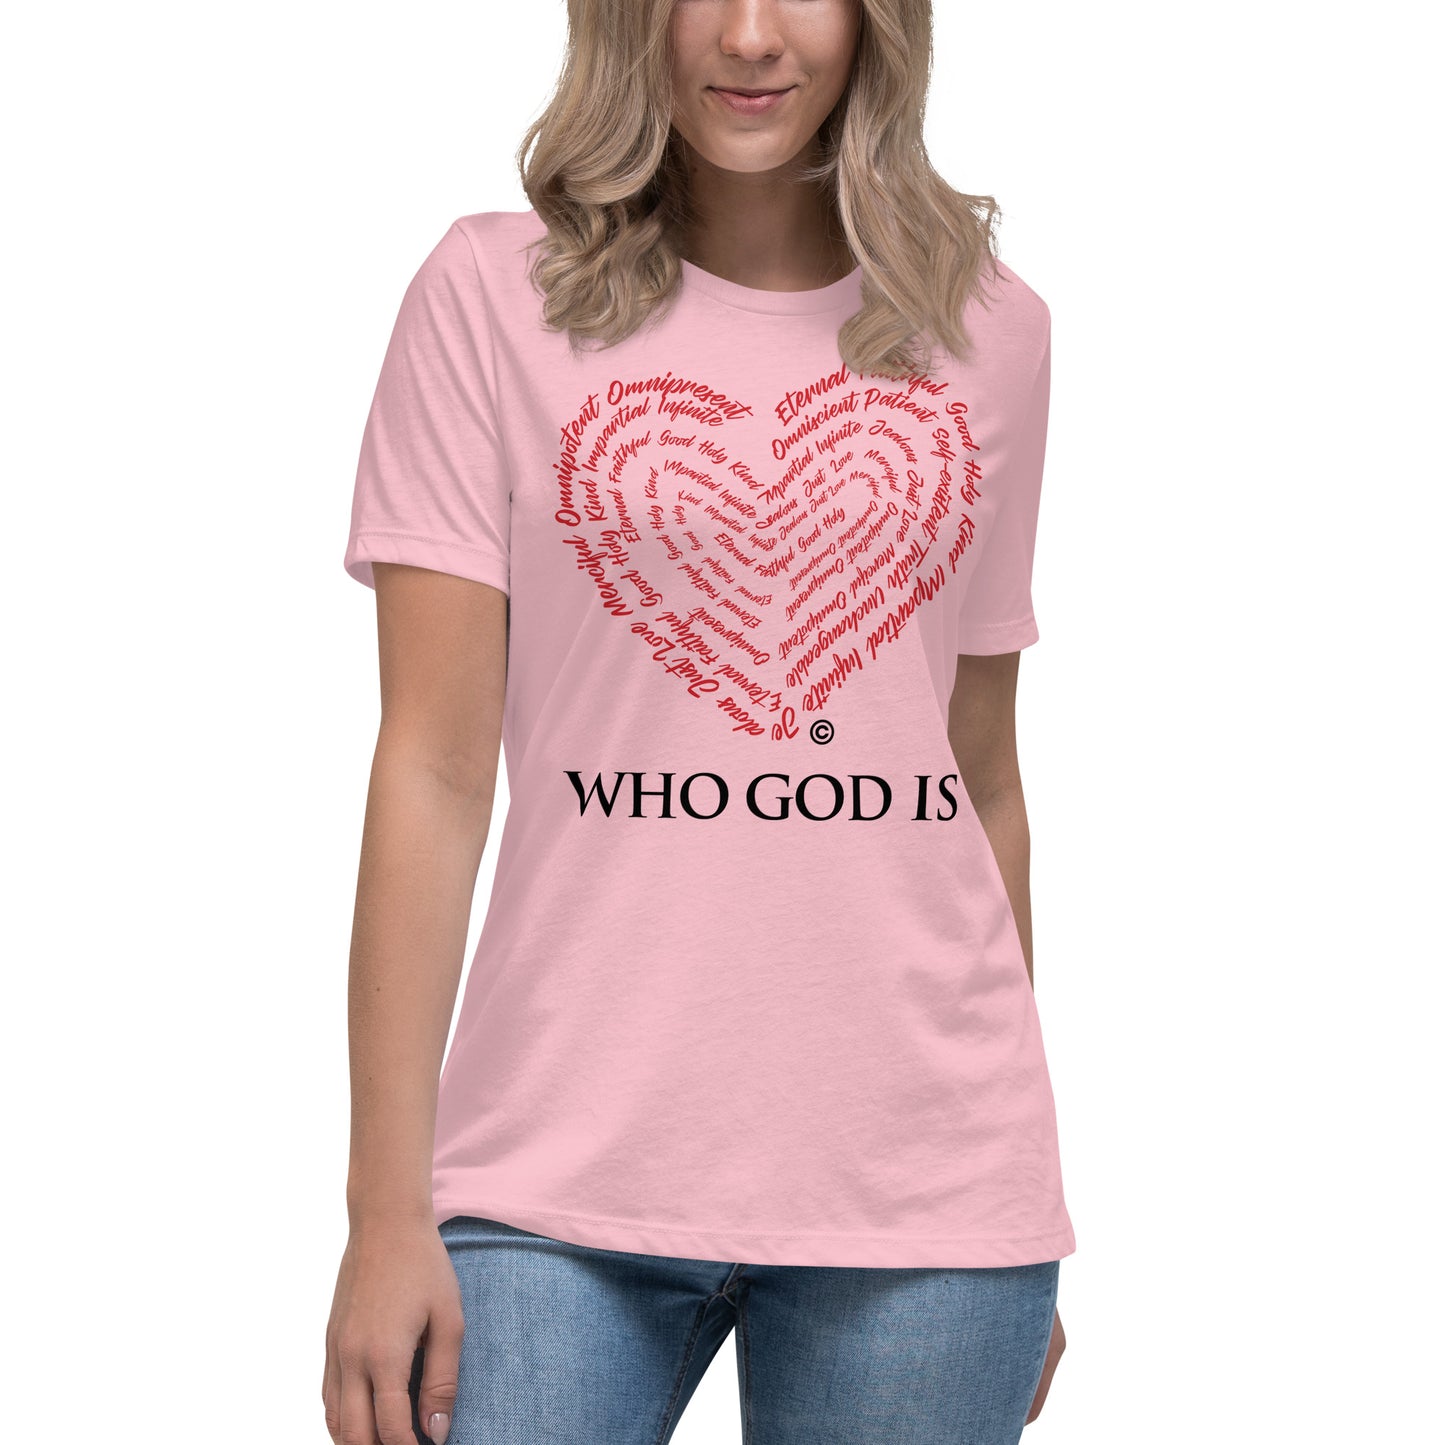 Who God Is Women's Relaxed T-Shirt